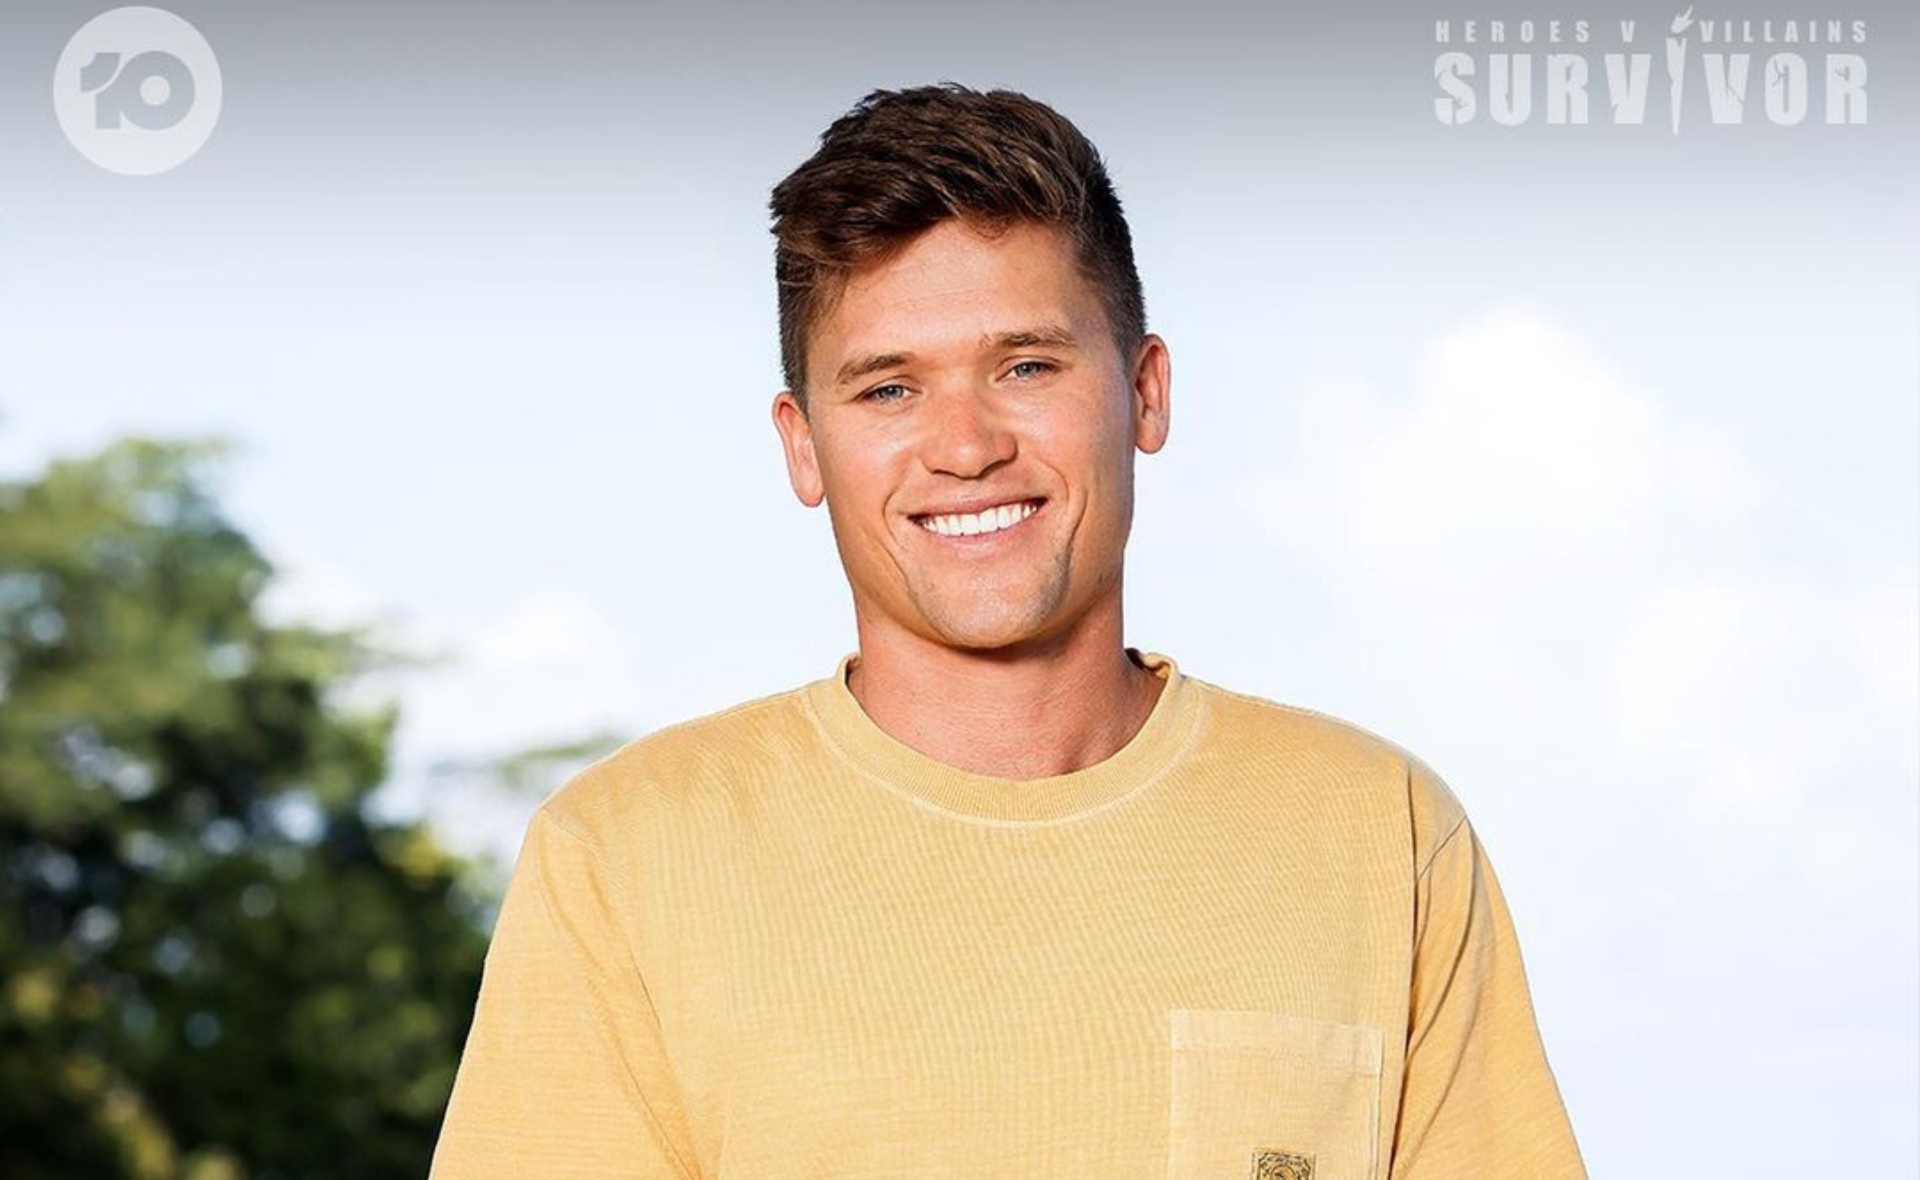 EXCLUSIVE: Survivor’s Matt reveals what he wished he had done differently